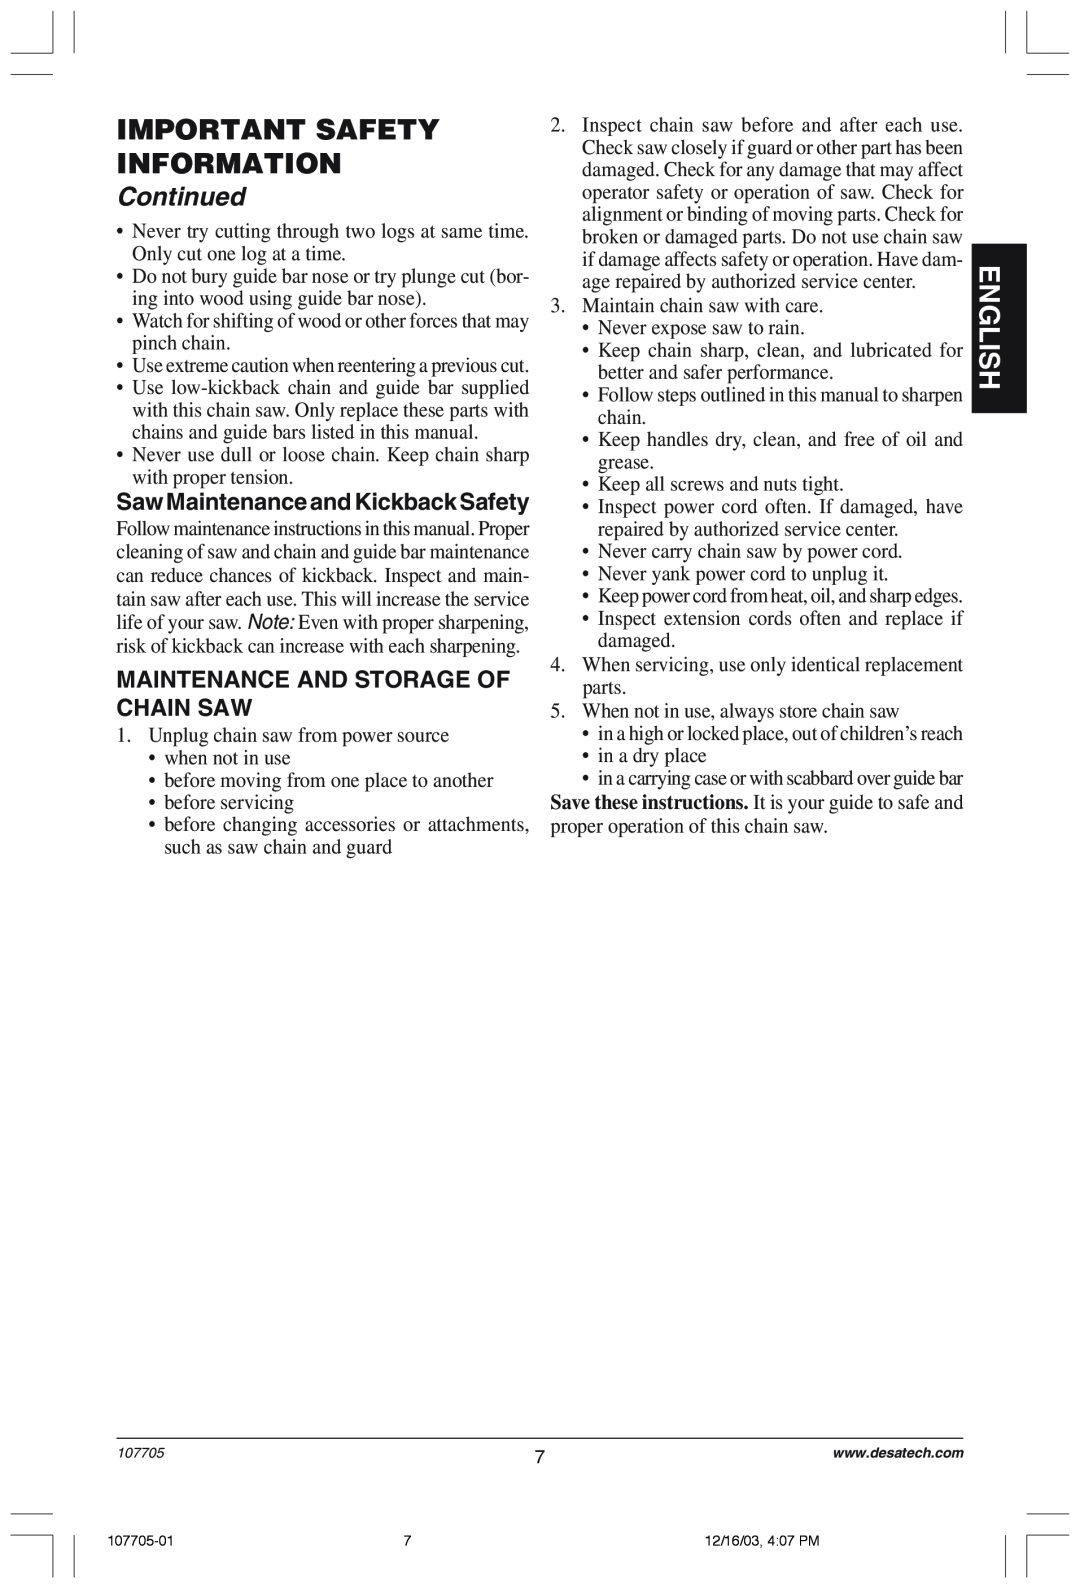 Desa 107624-01 owner manual Maintenance And Storage Of Chain Saw, Important Safety Information, English, Continued 